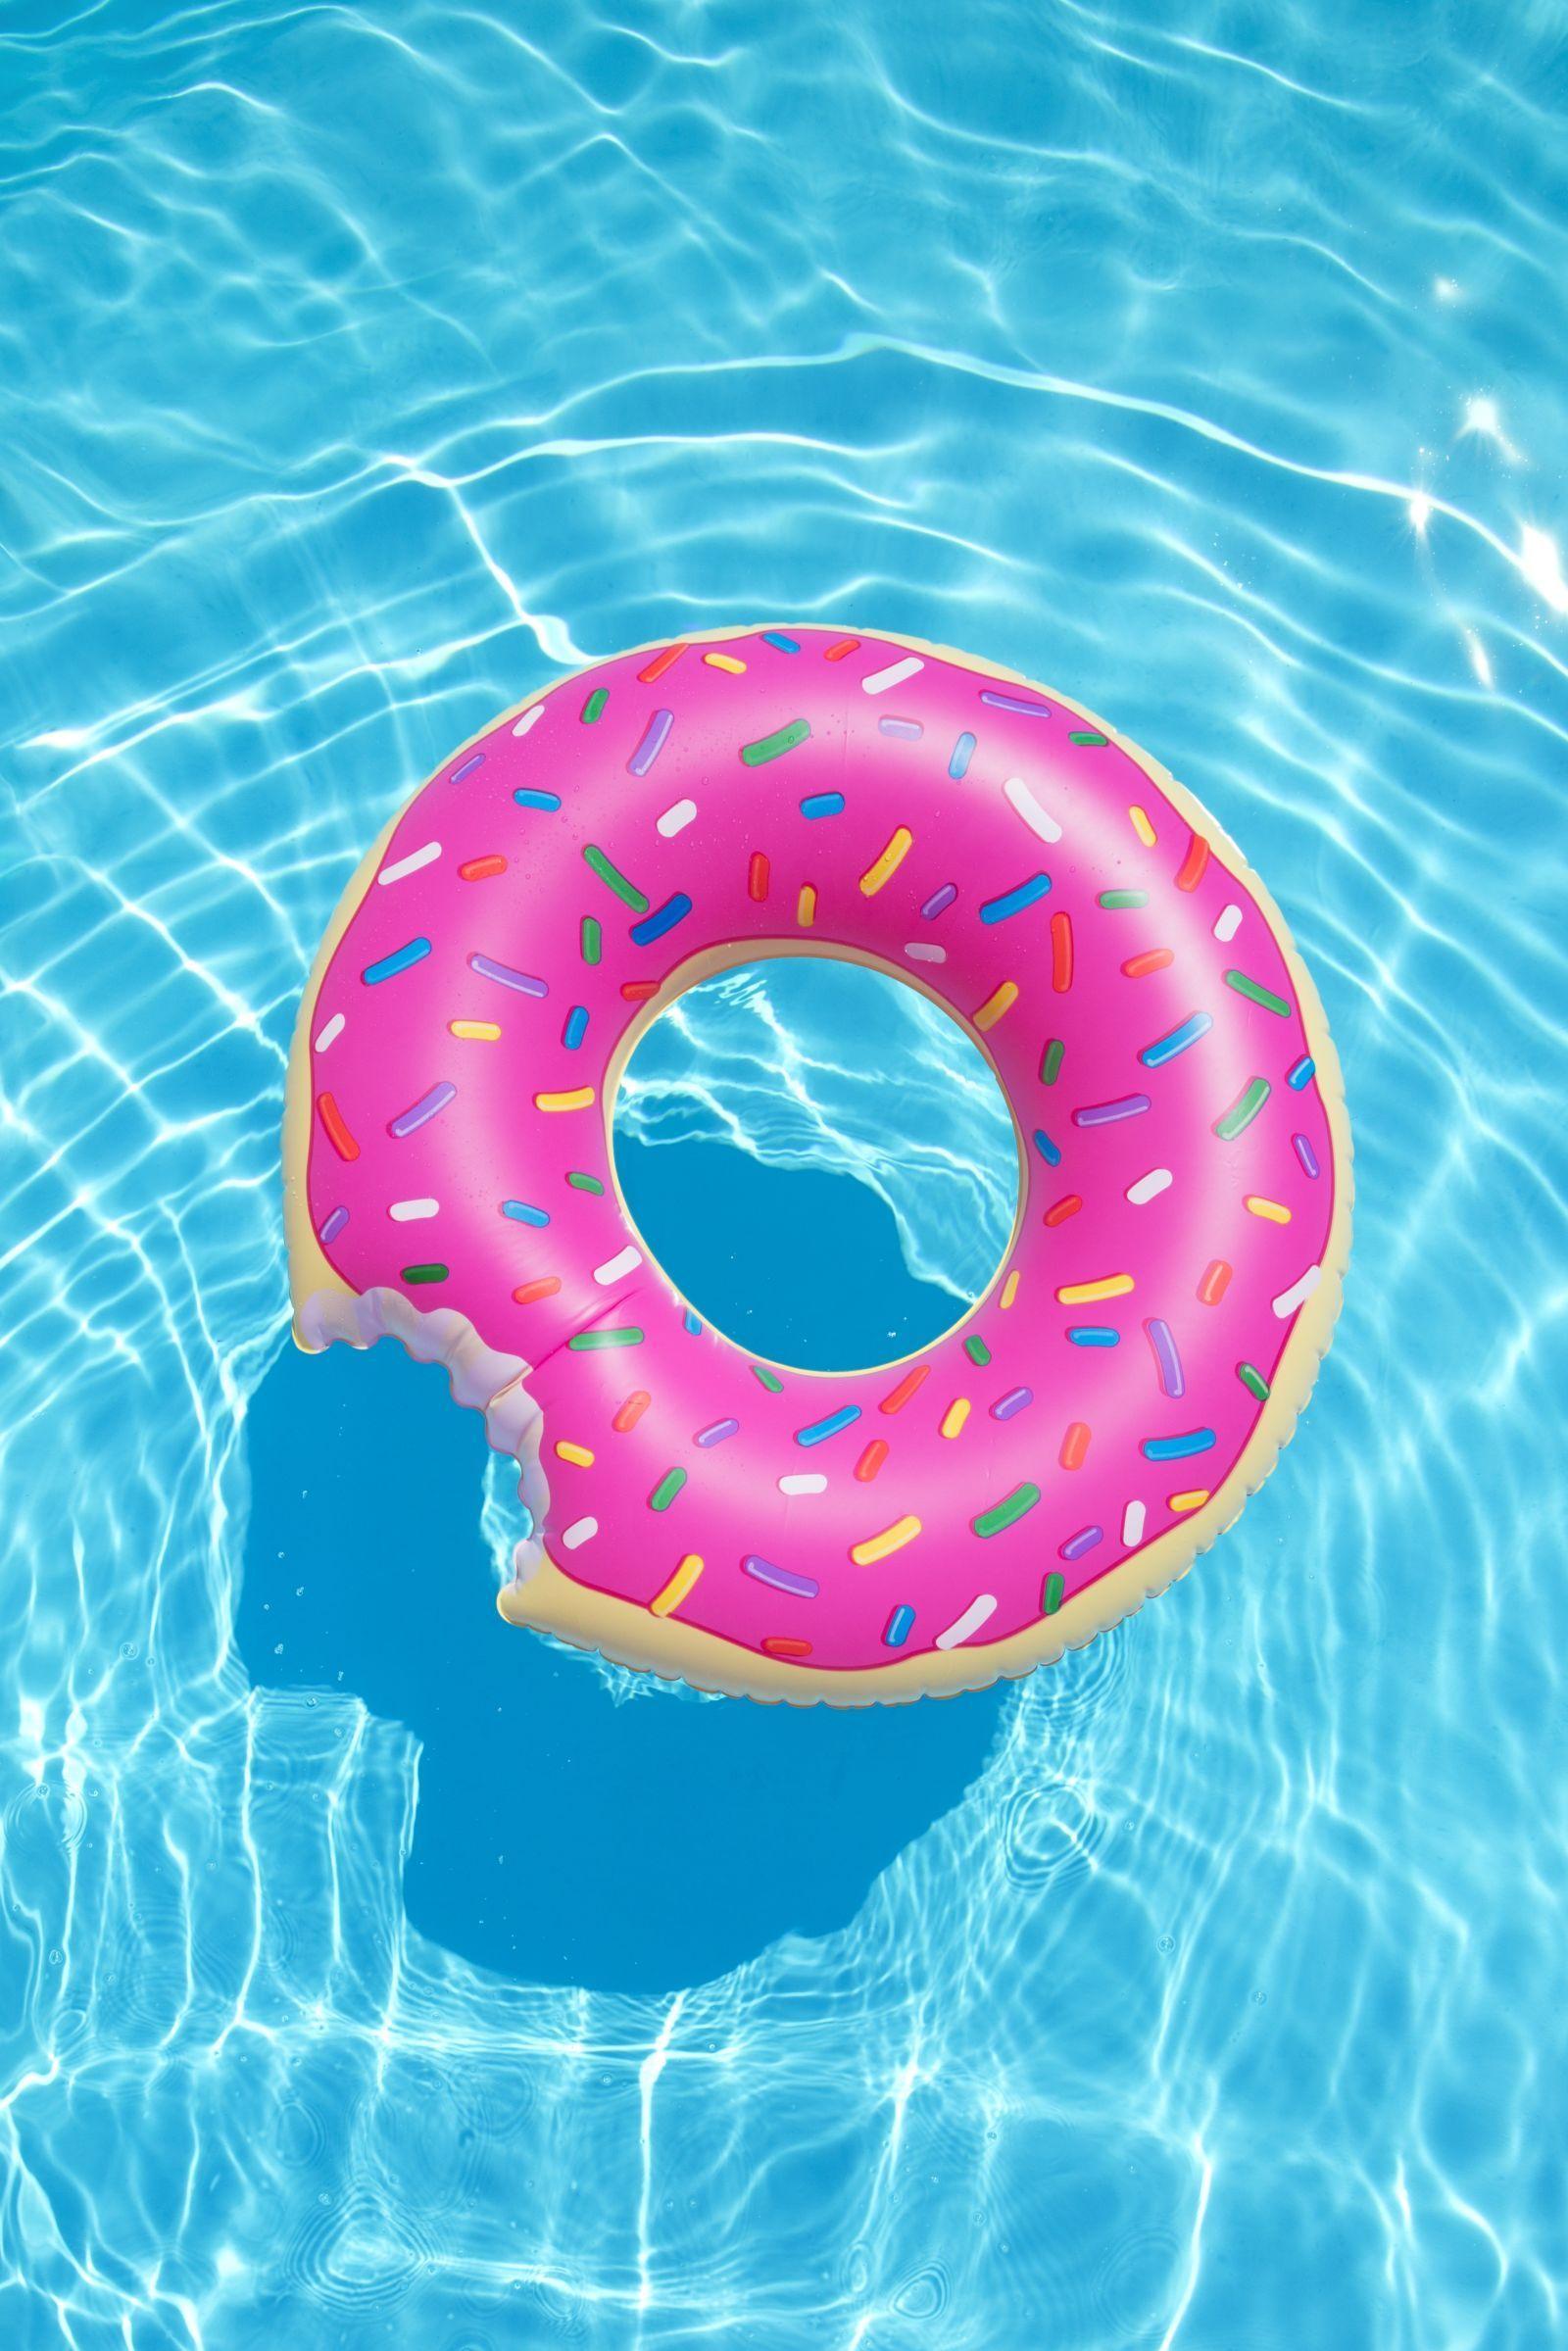 Awesome Pool Floats Every Food Lover Should Own. iPhone wallpaper girly, Summer wallpaper, Wallpaper iphone summer